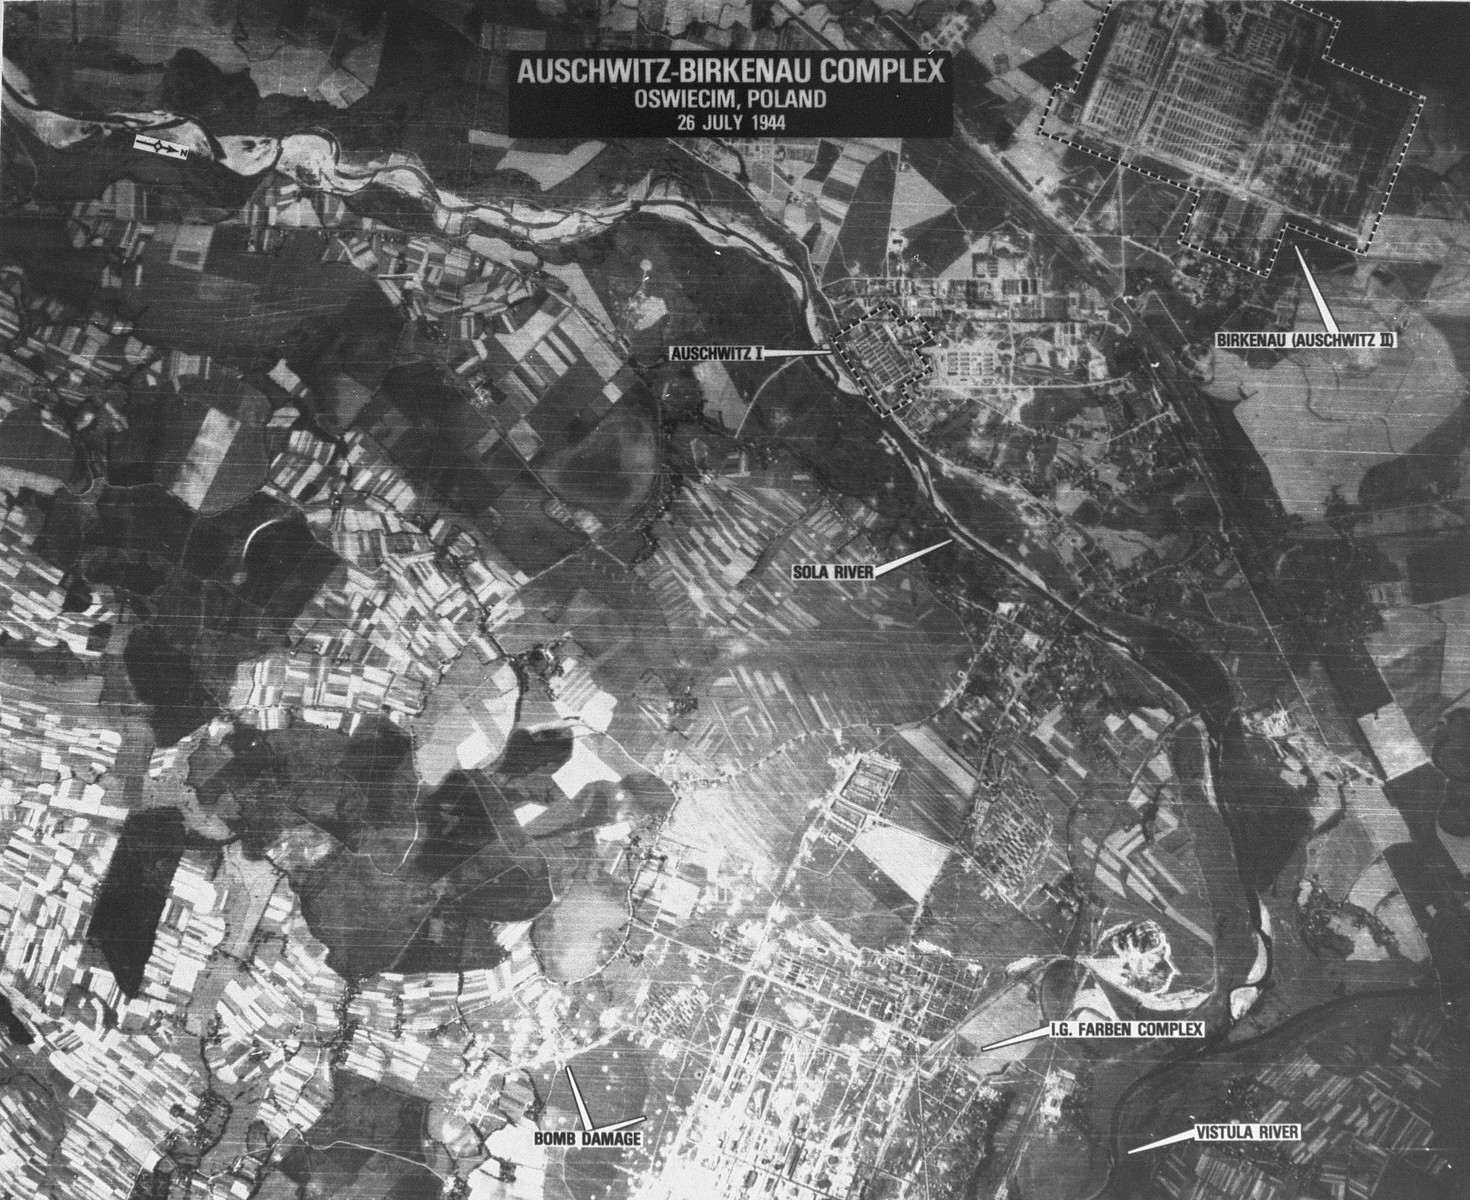 An aerial reconnaissance photograph  showing  Auschwitz II (Birkenau),  including the I.G. Farben plant.